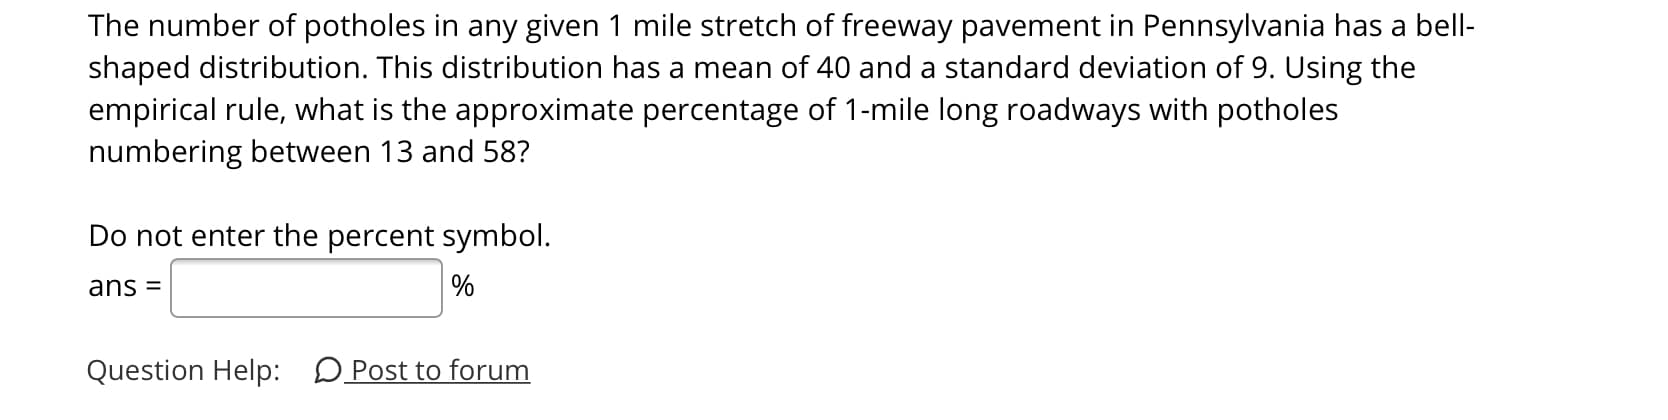 The number of potholes in any given 1 mile stretch of freeway pavement in Pennsylvania has a bell-
shaped distribution. This distribution has a mean of 40 and a standard deviation of 9. Using the
empirical rule, what is the approximate percentage of 1-mile long roadways with potholes
numbering between 13 and 58?
